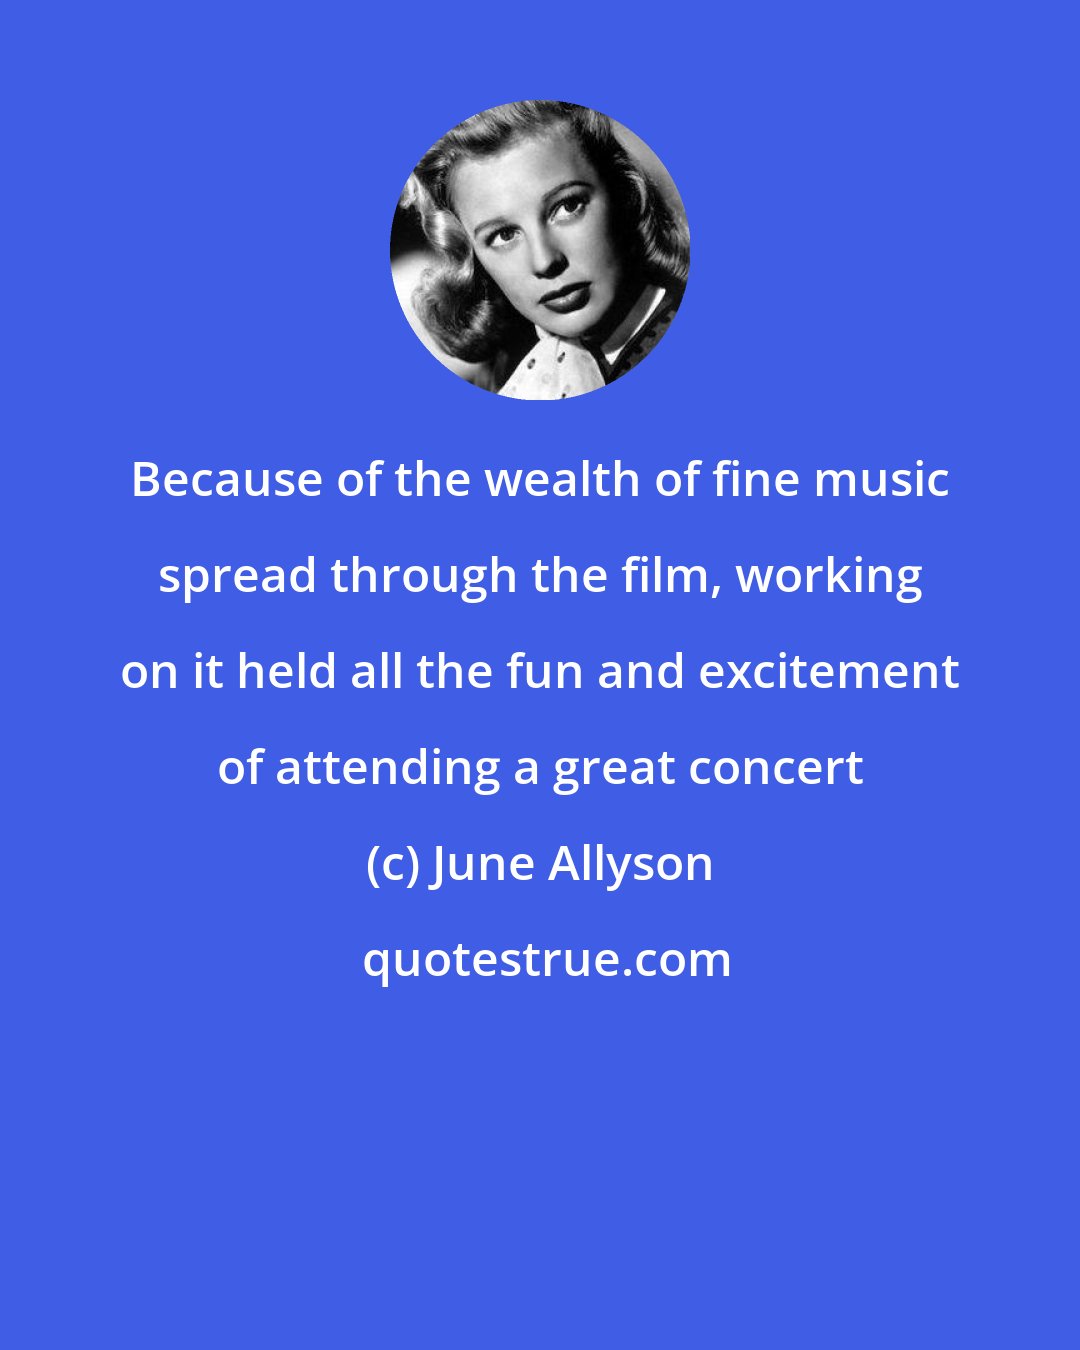 June Allyson: Because of the wealth of fine music spread through the film, working on it held all the fun and excitement of attending a great concert